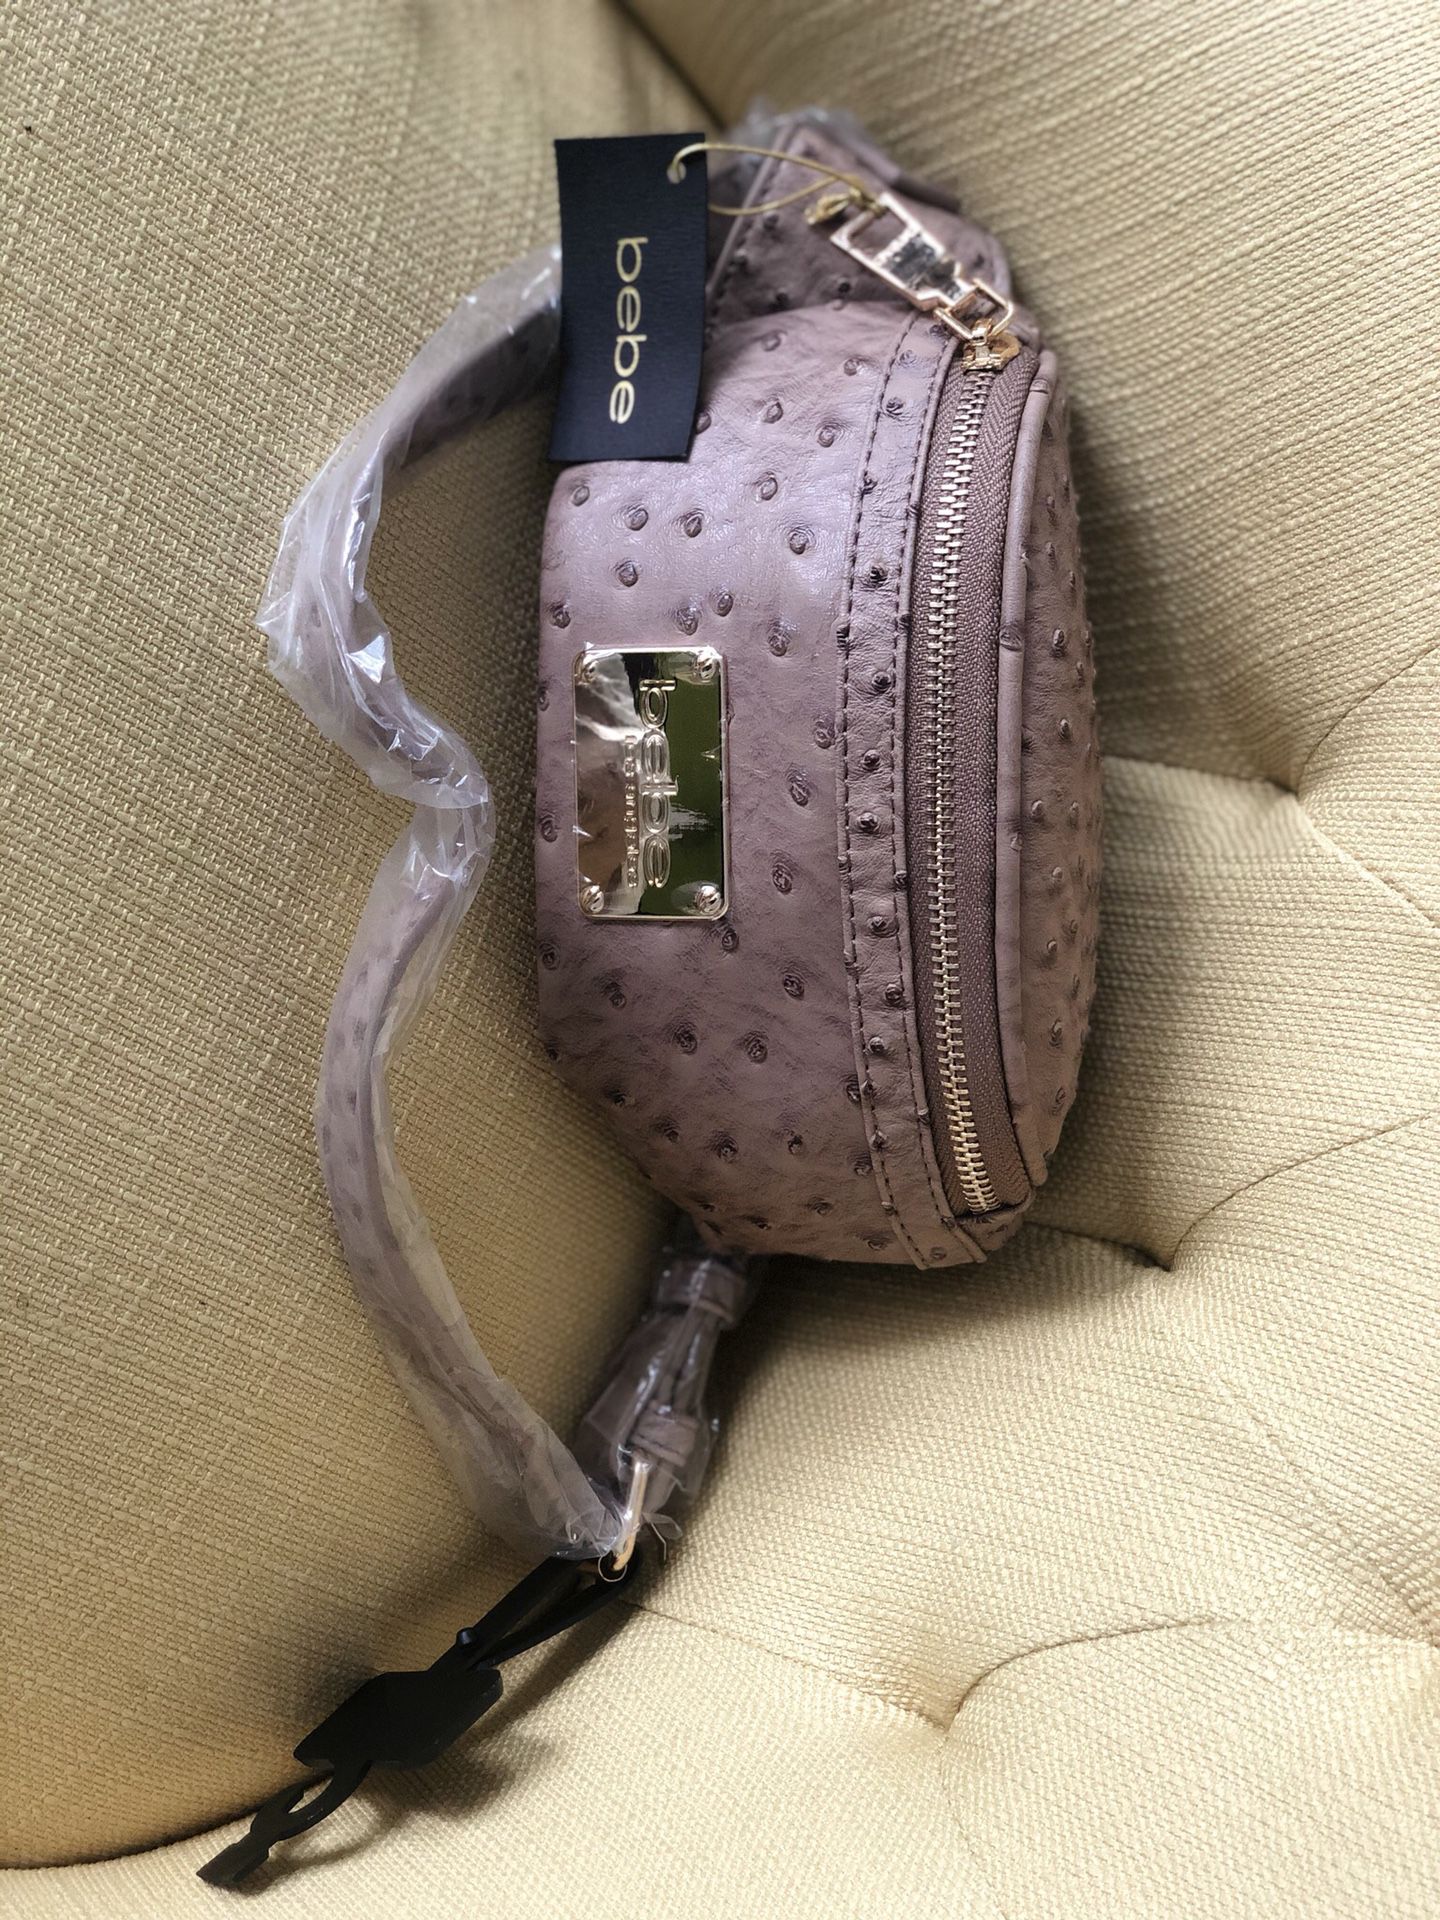 Brand new Bebe Fanny packs waist bag at affordable prices